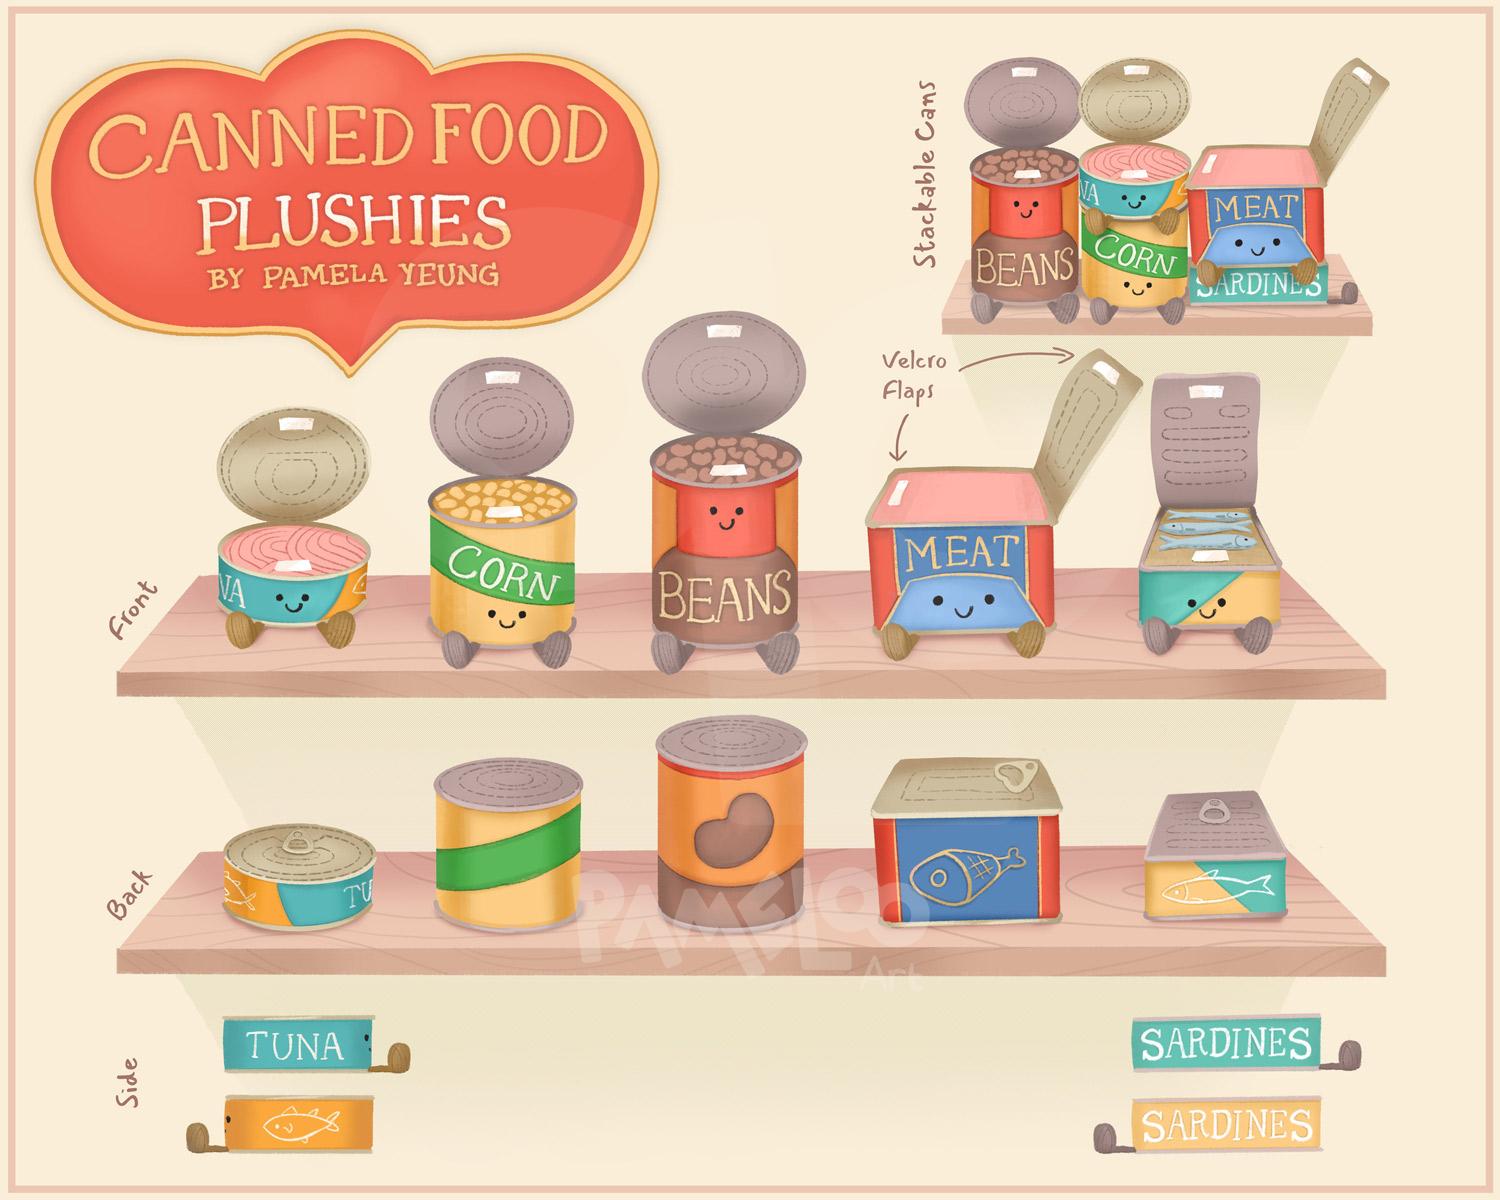 Canned Food Plushies